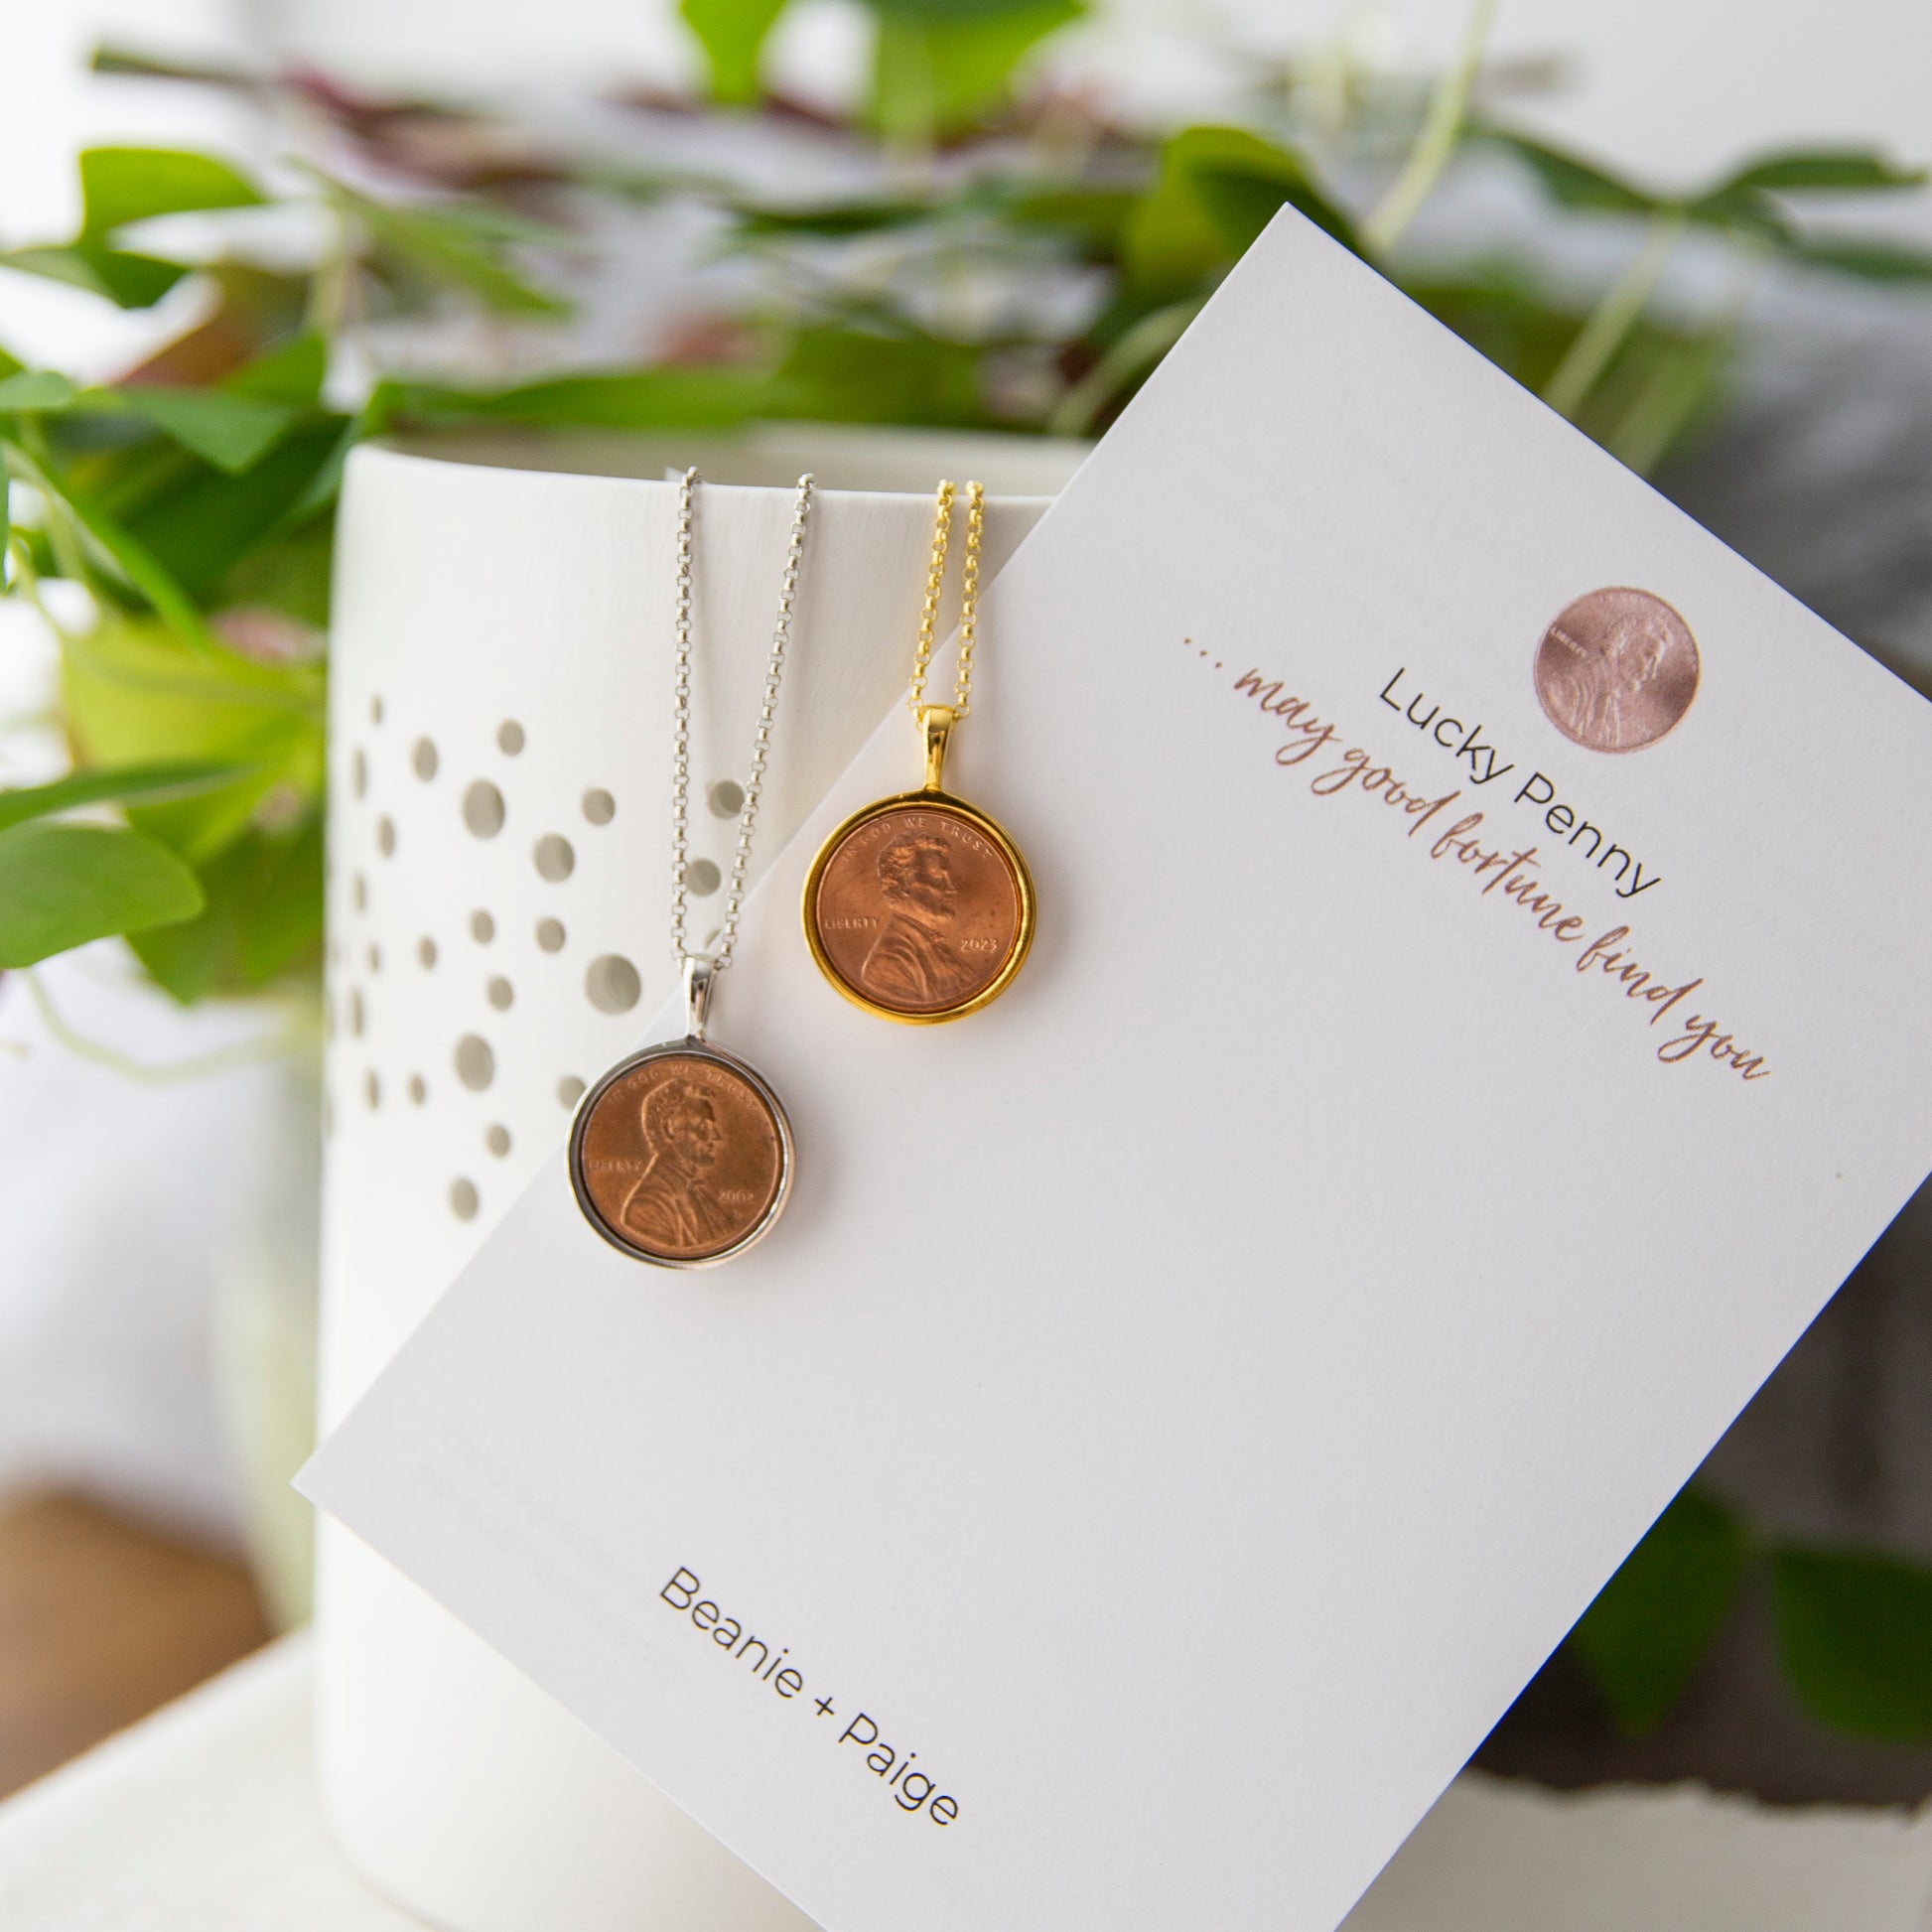 Lucky Penny Necklaces in both silver and gold on card